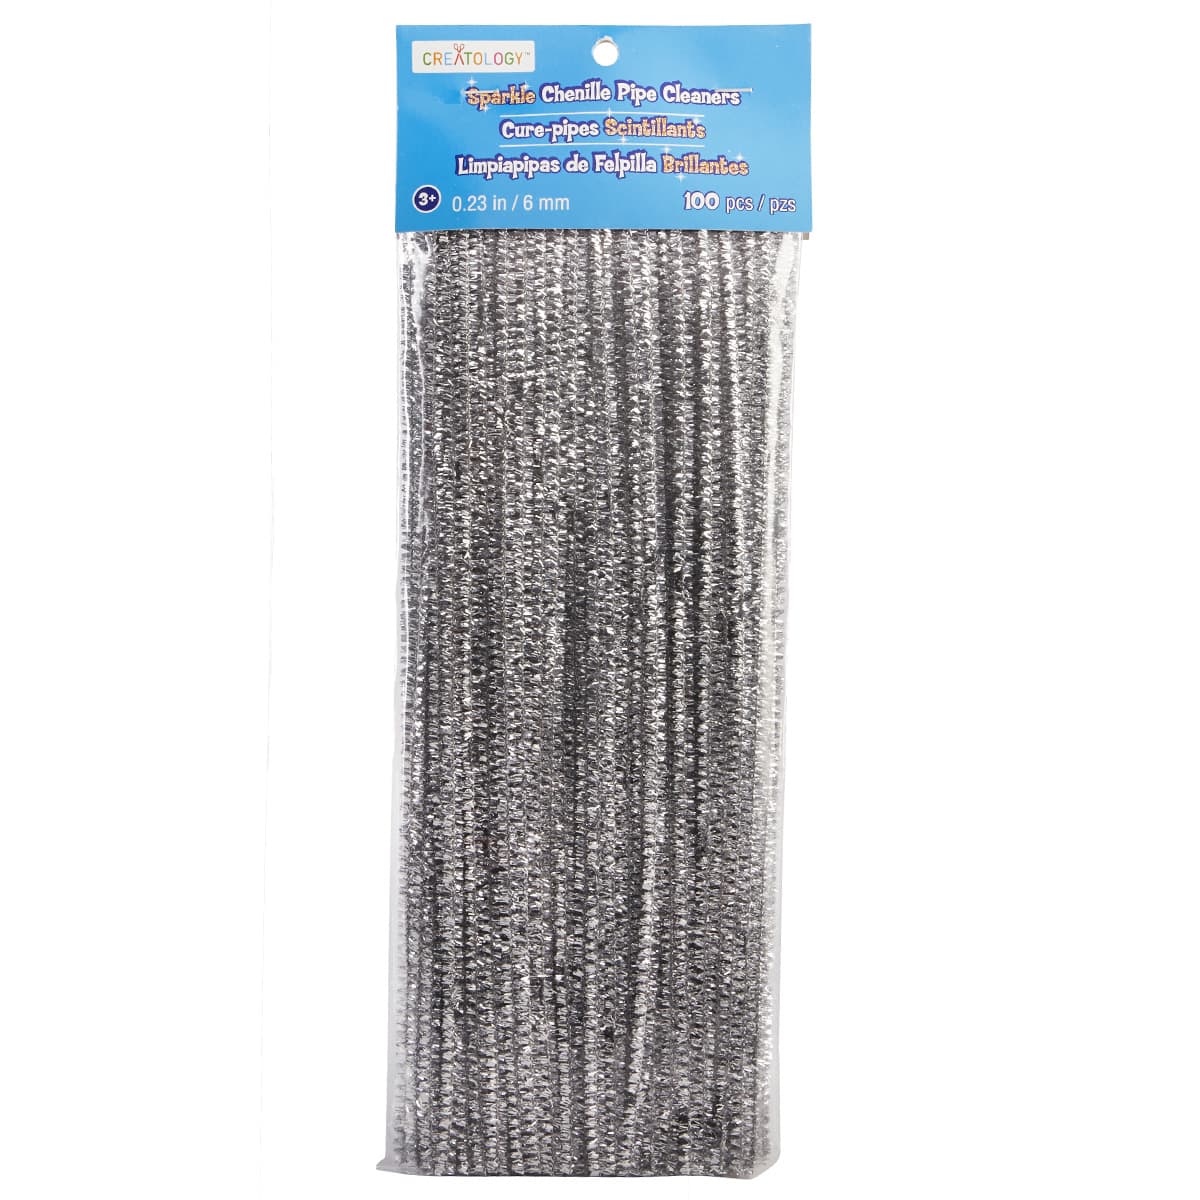 12 Packs: 100 ct. (1,200 total) 6mm Glitter Chenille Pipe Cleaners by Creatology&#x2122;